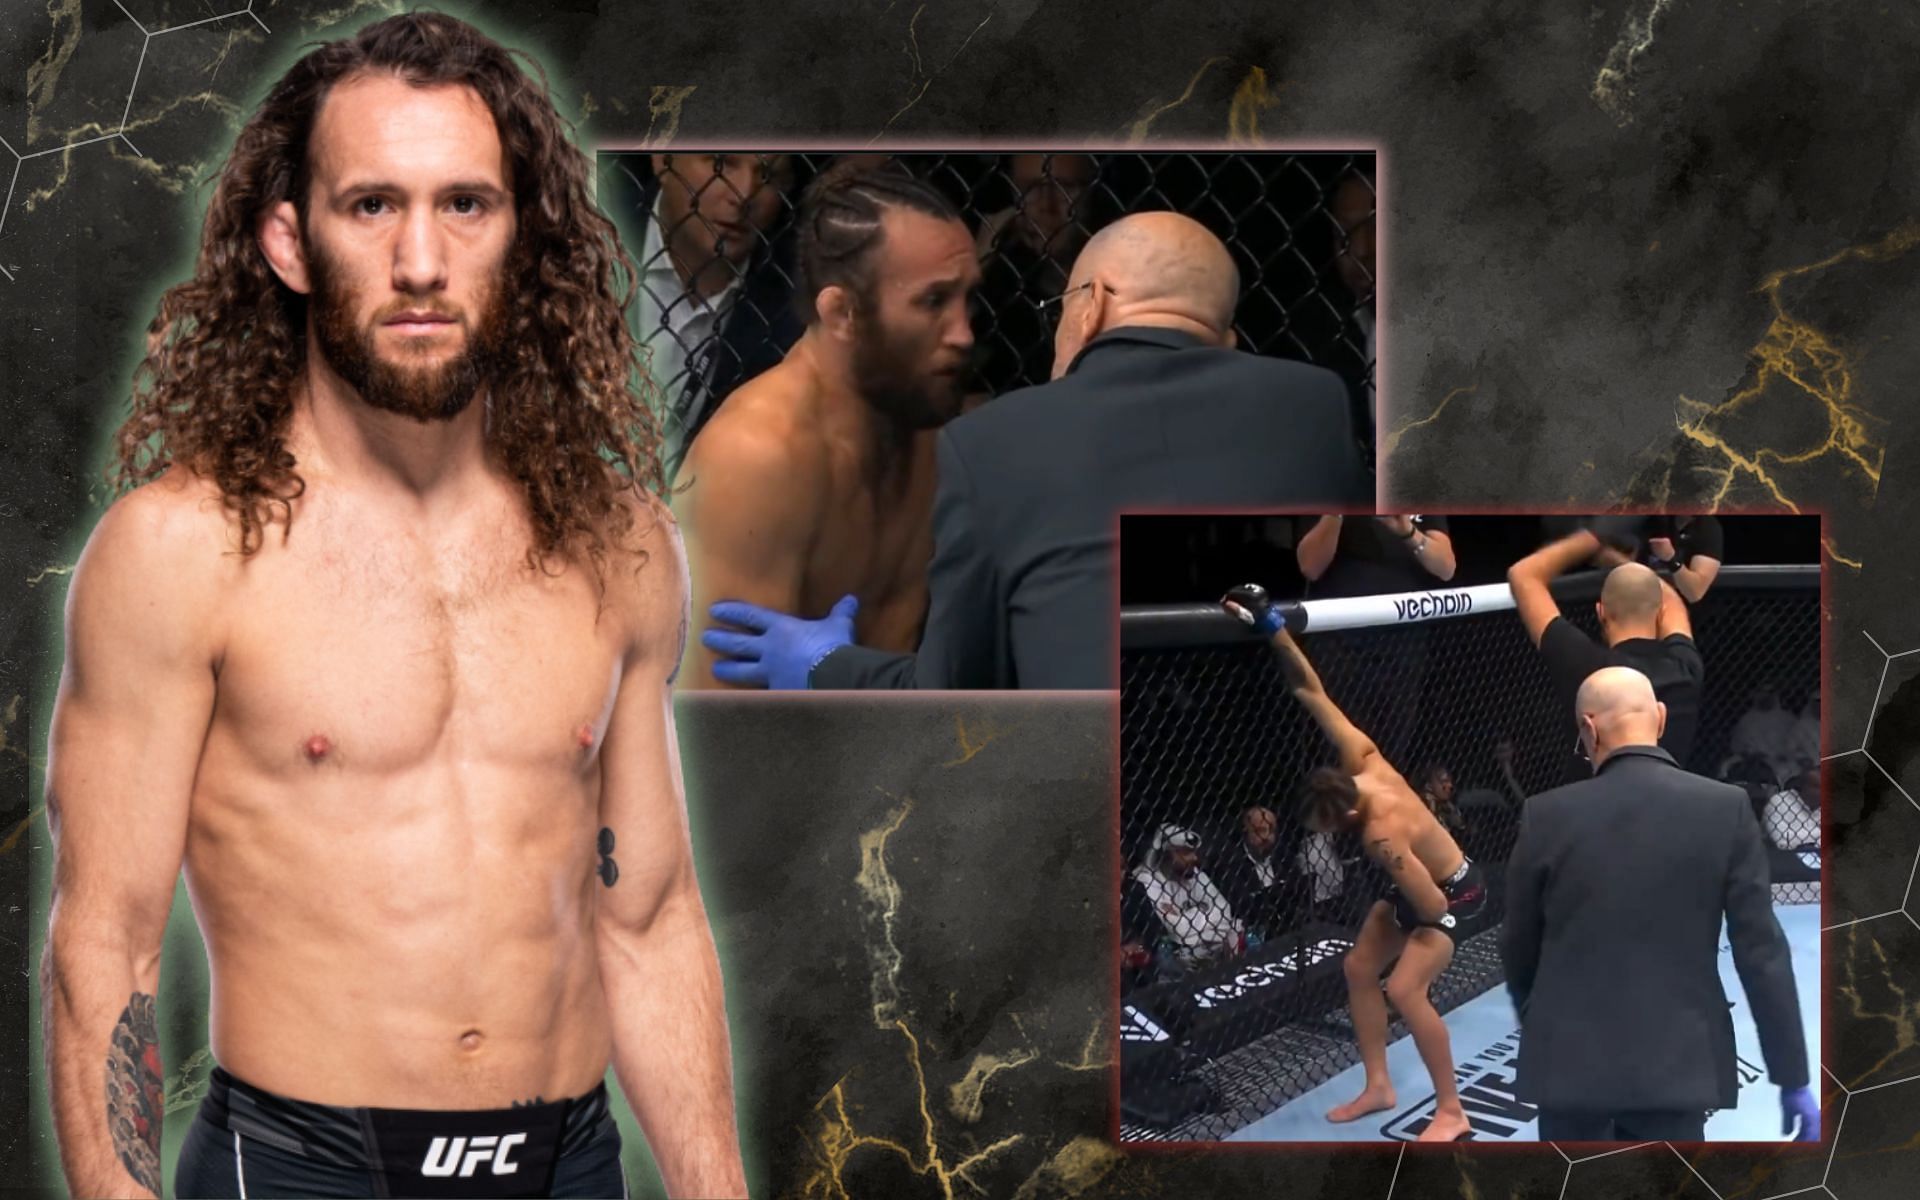 Victor Henry suffered low blow in his no-contest bout against Javid Basharat at UFC 284